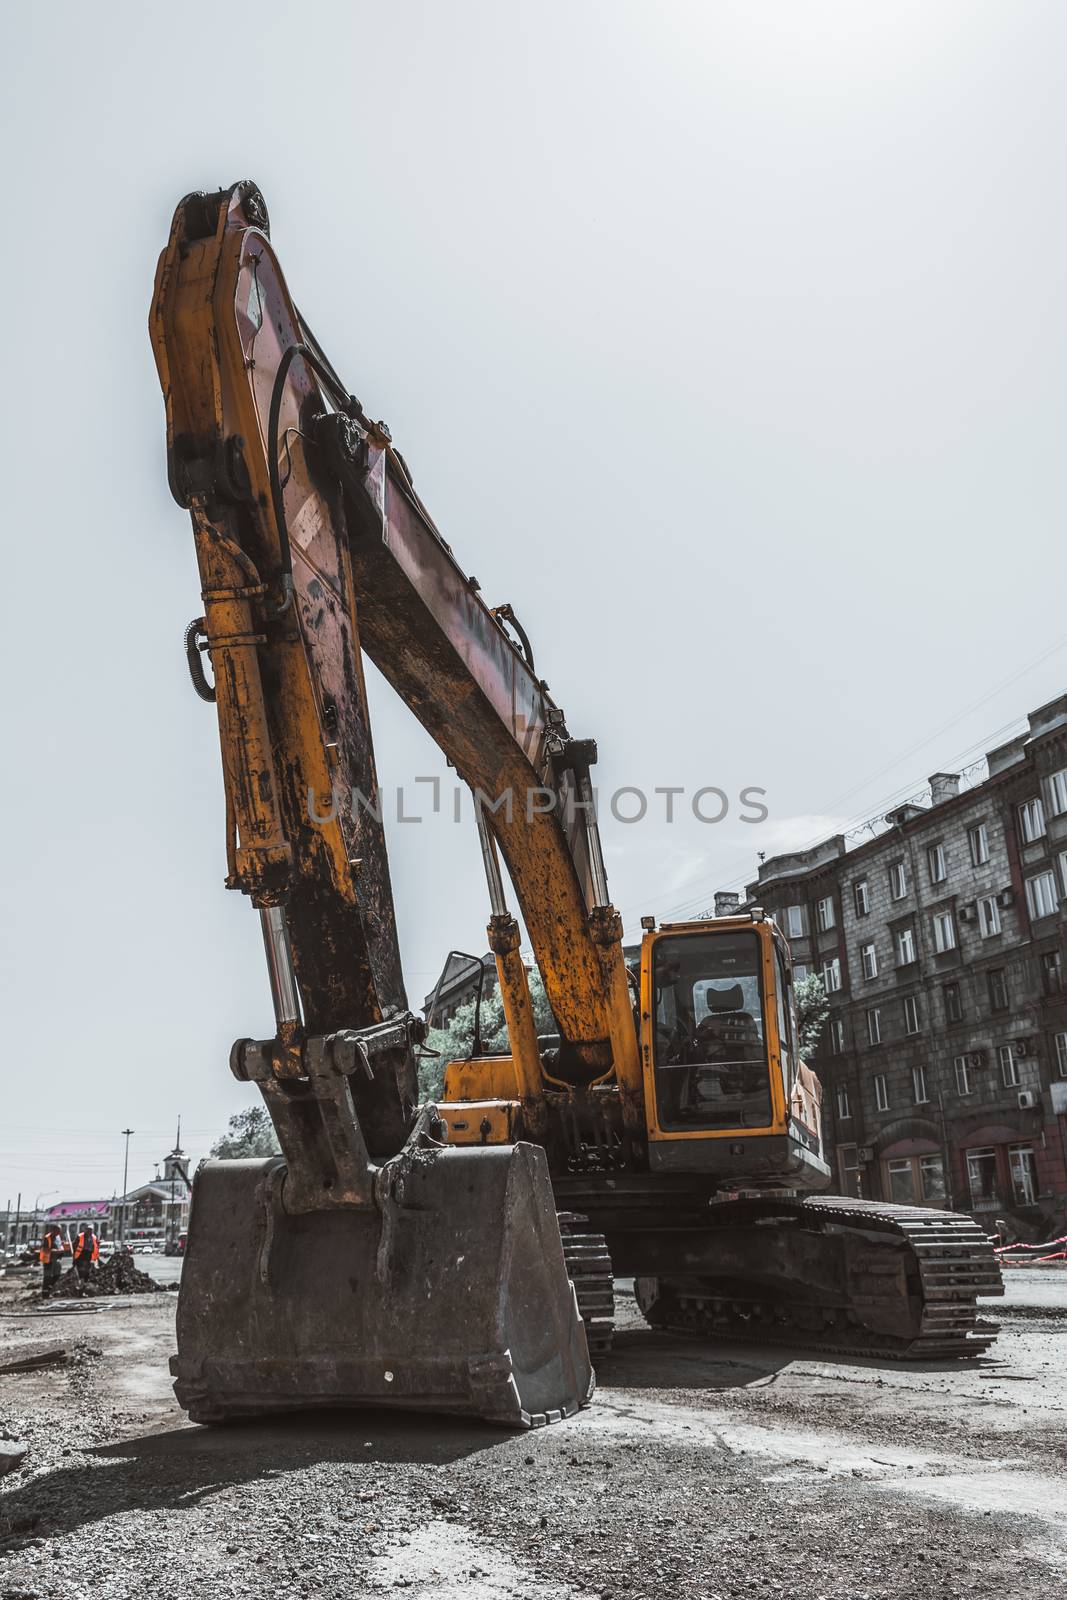 Excavator and his big bucket during the construction of the road against the backdrop of urban buildings